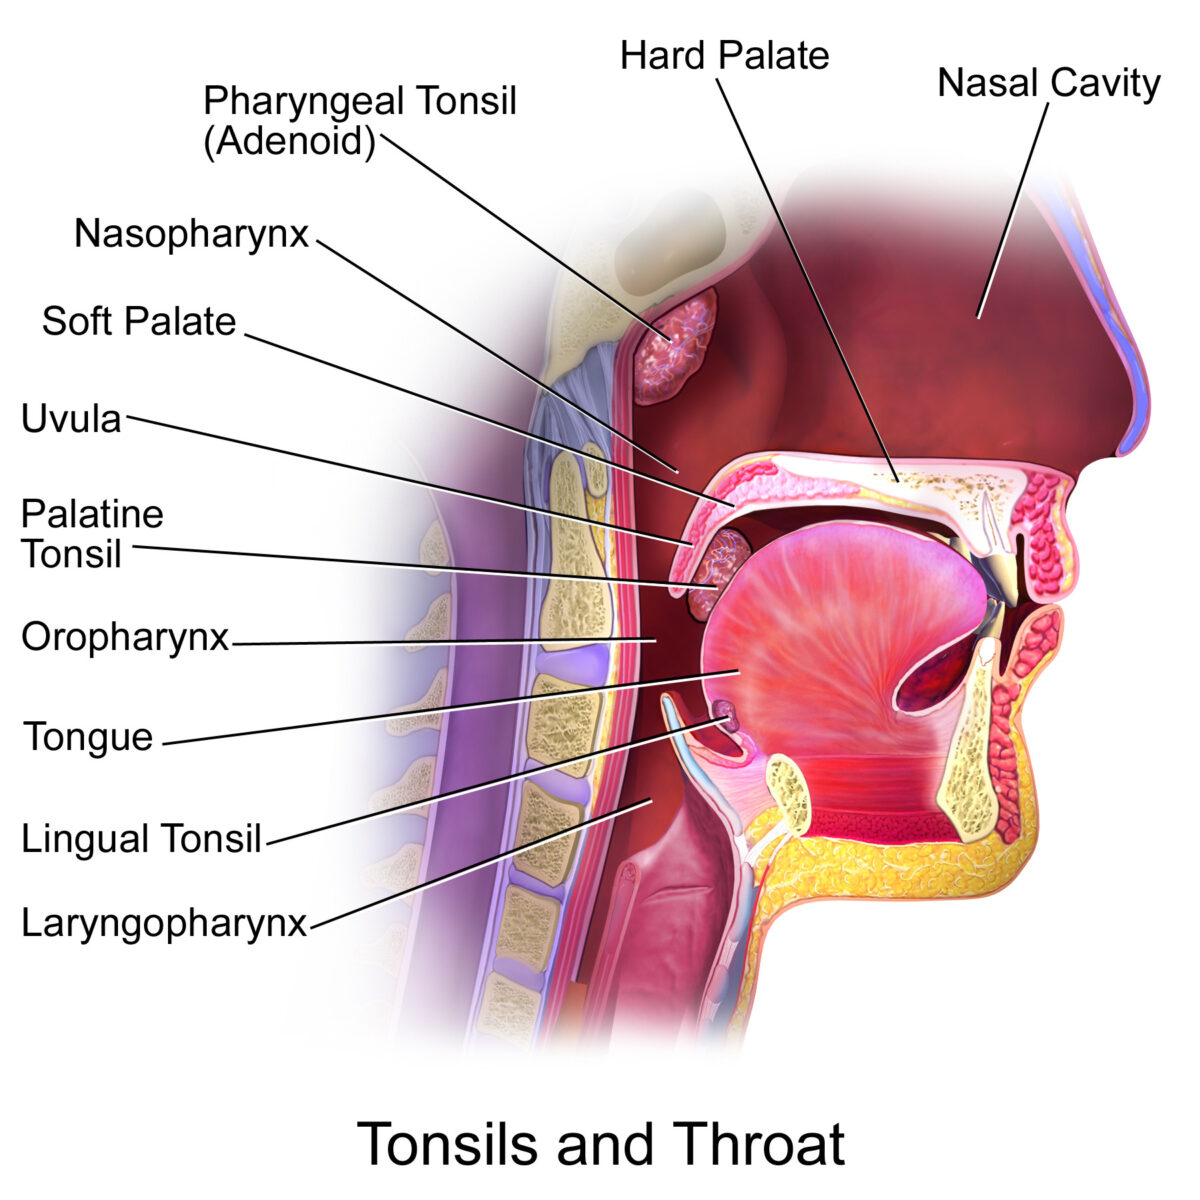 Tonsils in the oropharyngeal area and nasopharynx